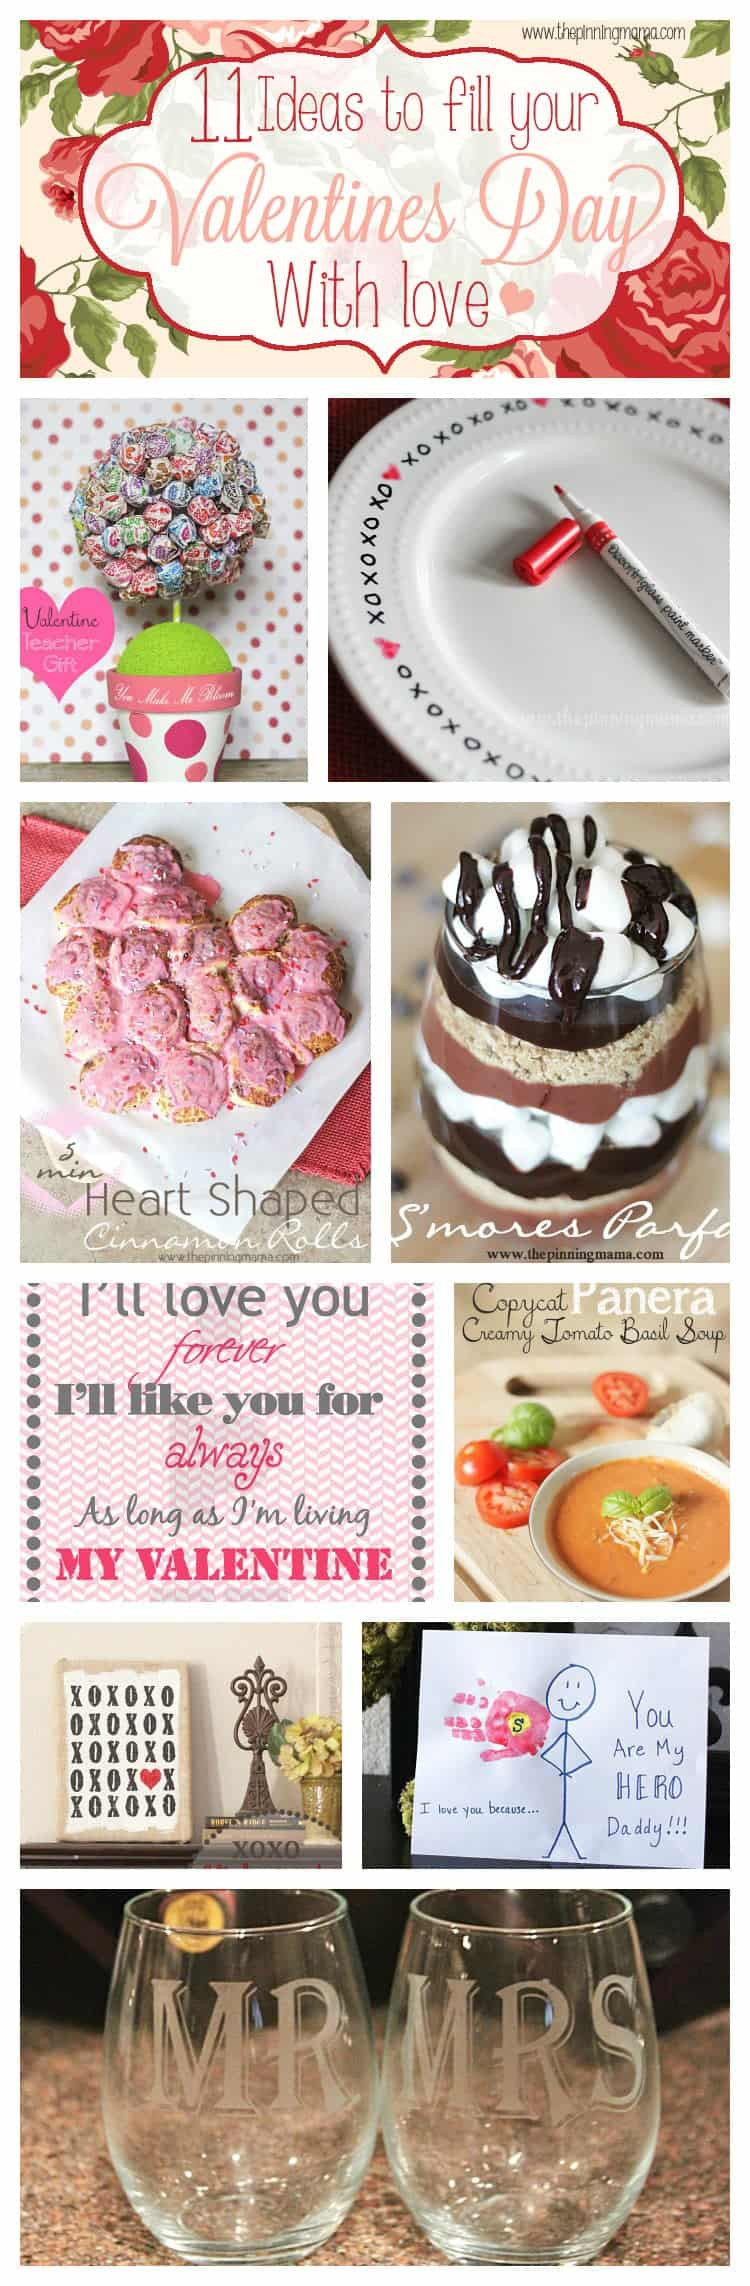 Single Valentines Day Ideas
 11 Ways To Add A Little Love To Your Valentine s Day • The